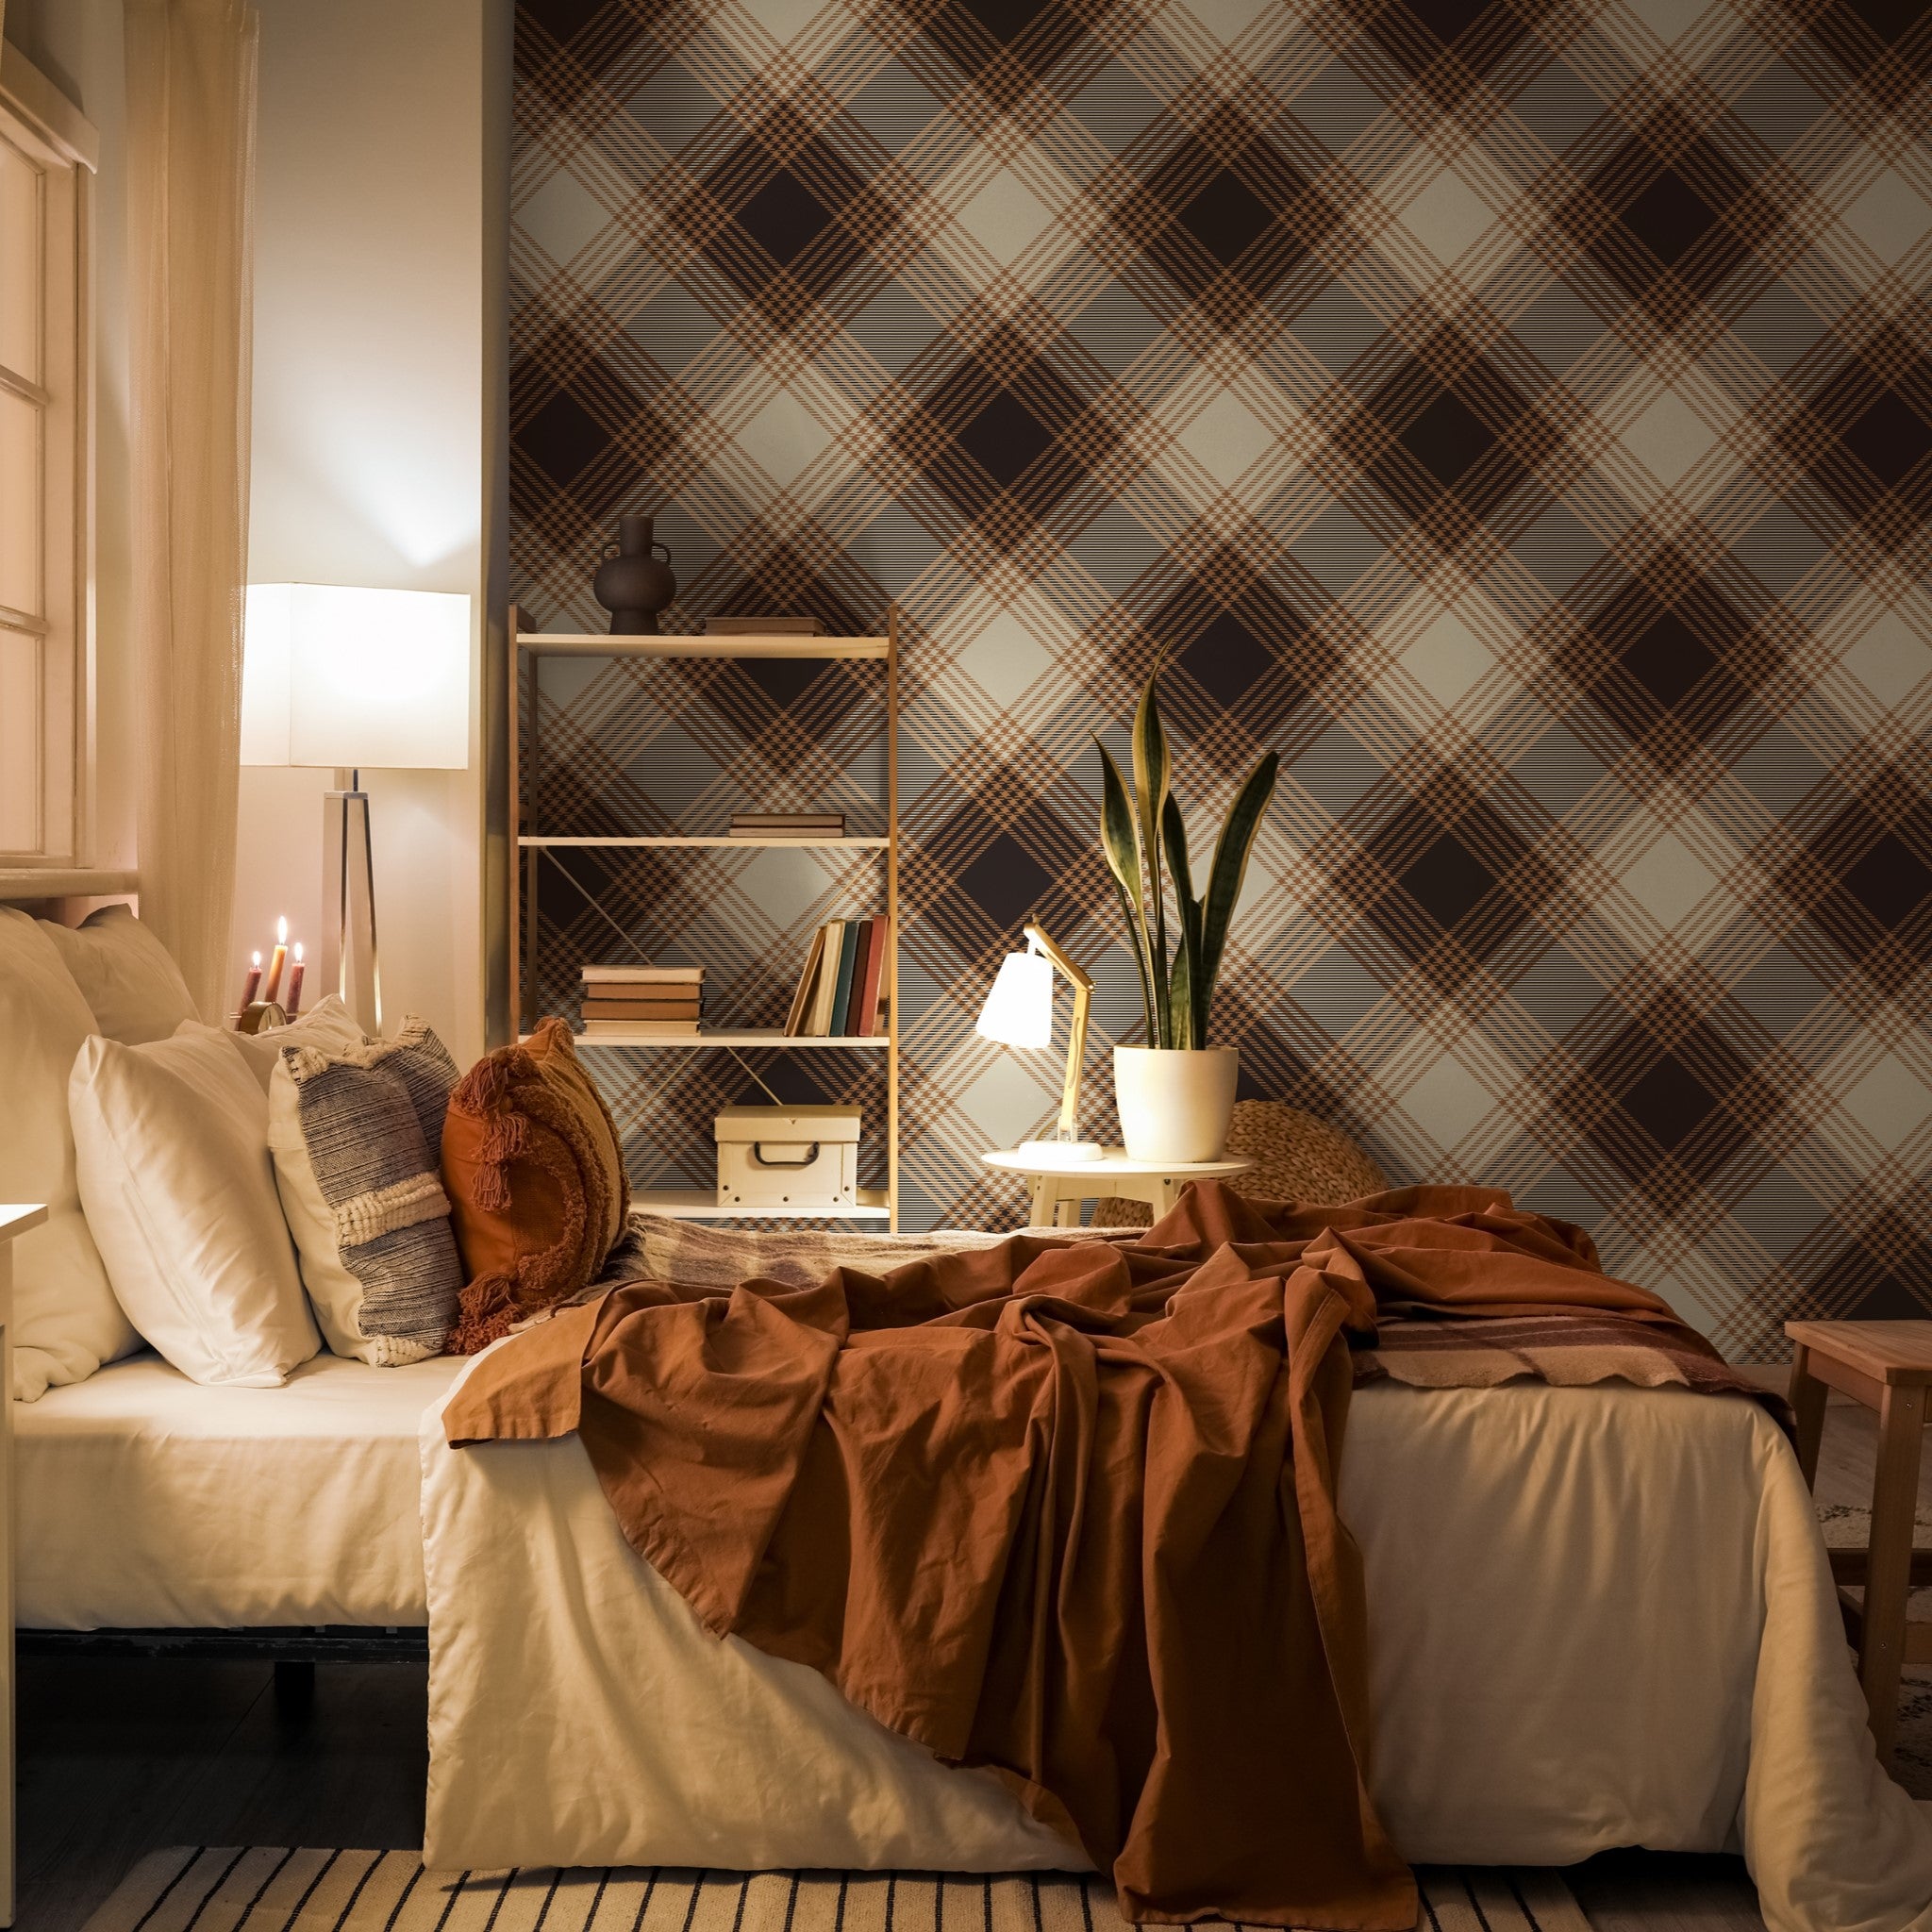 "Cozy bedroom featuring Wall Blush's Franklin Wallpaper in a classic plaid design, highlighting warm decor accents."